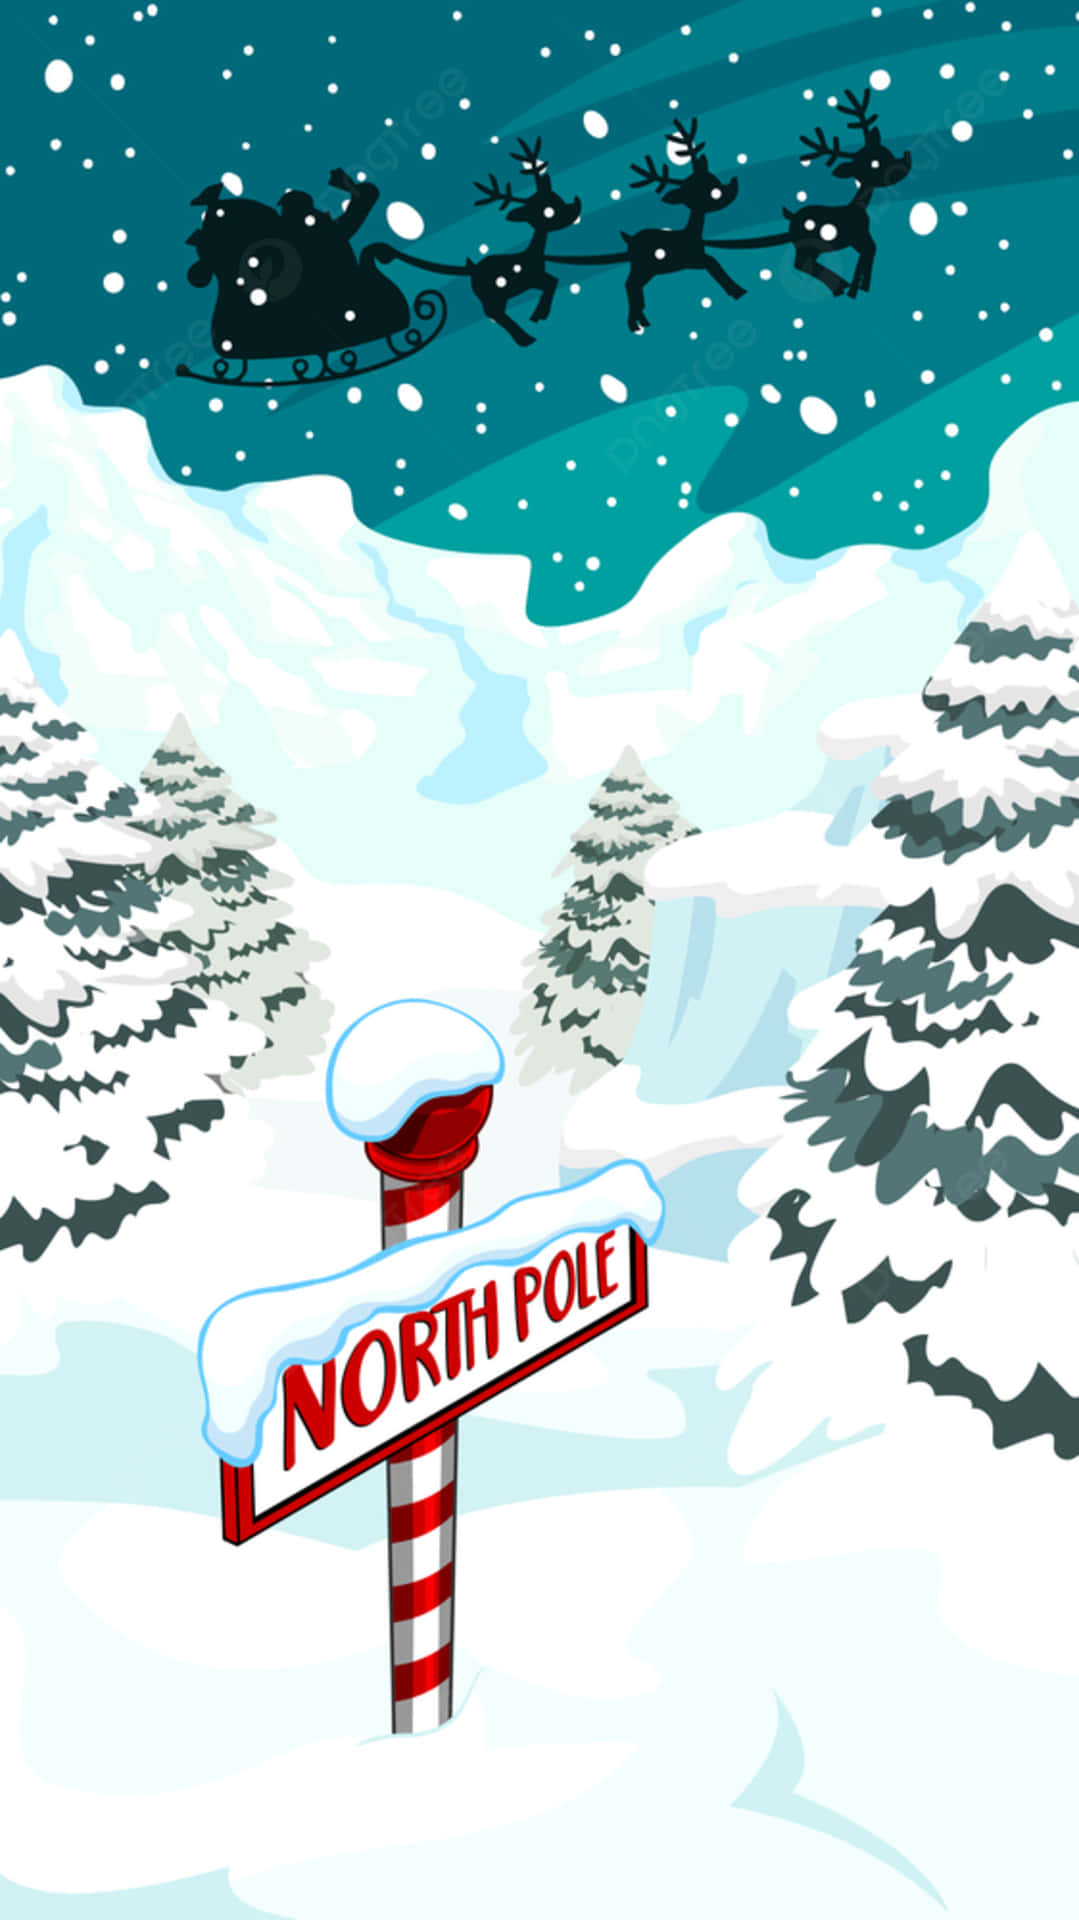 Explore the Wonders of the North Pole